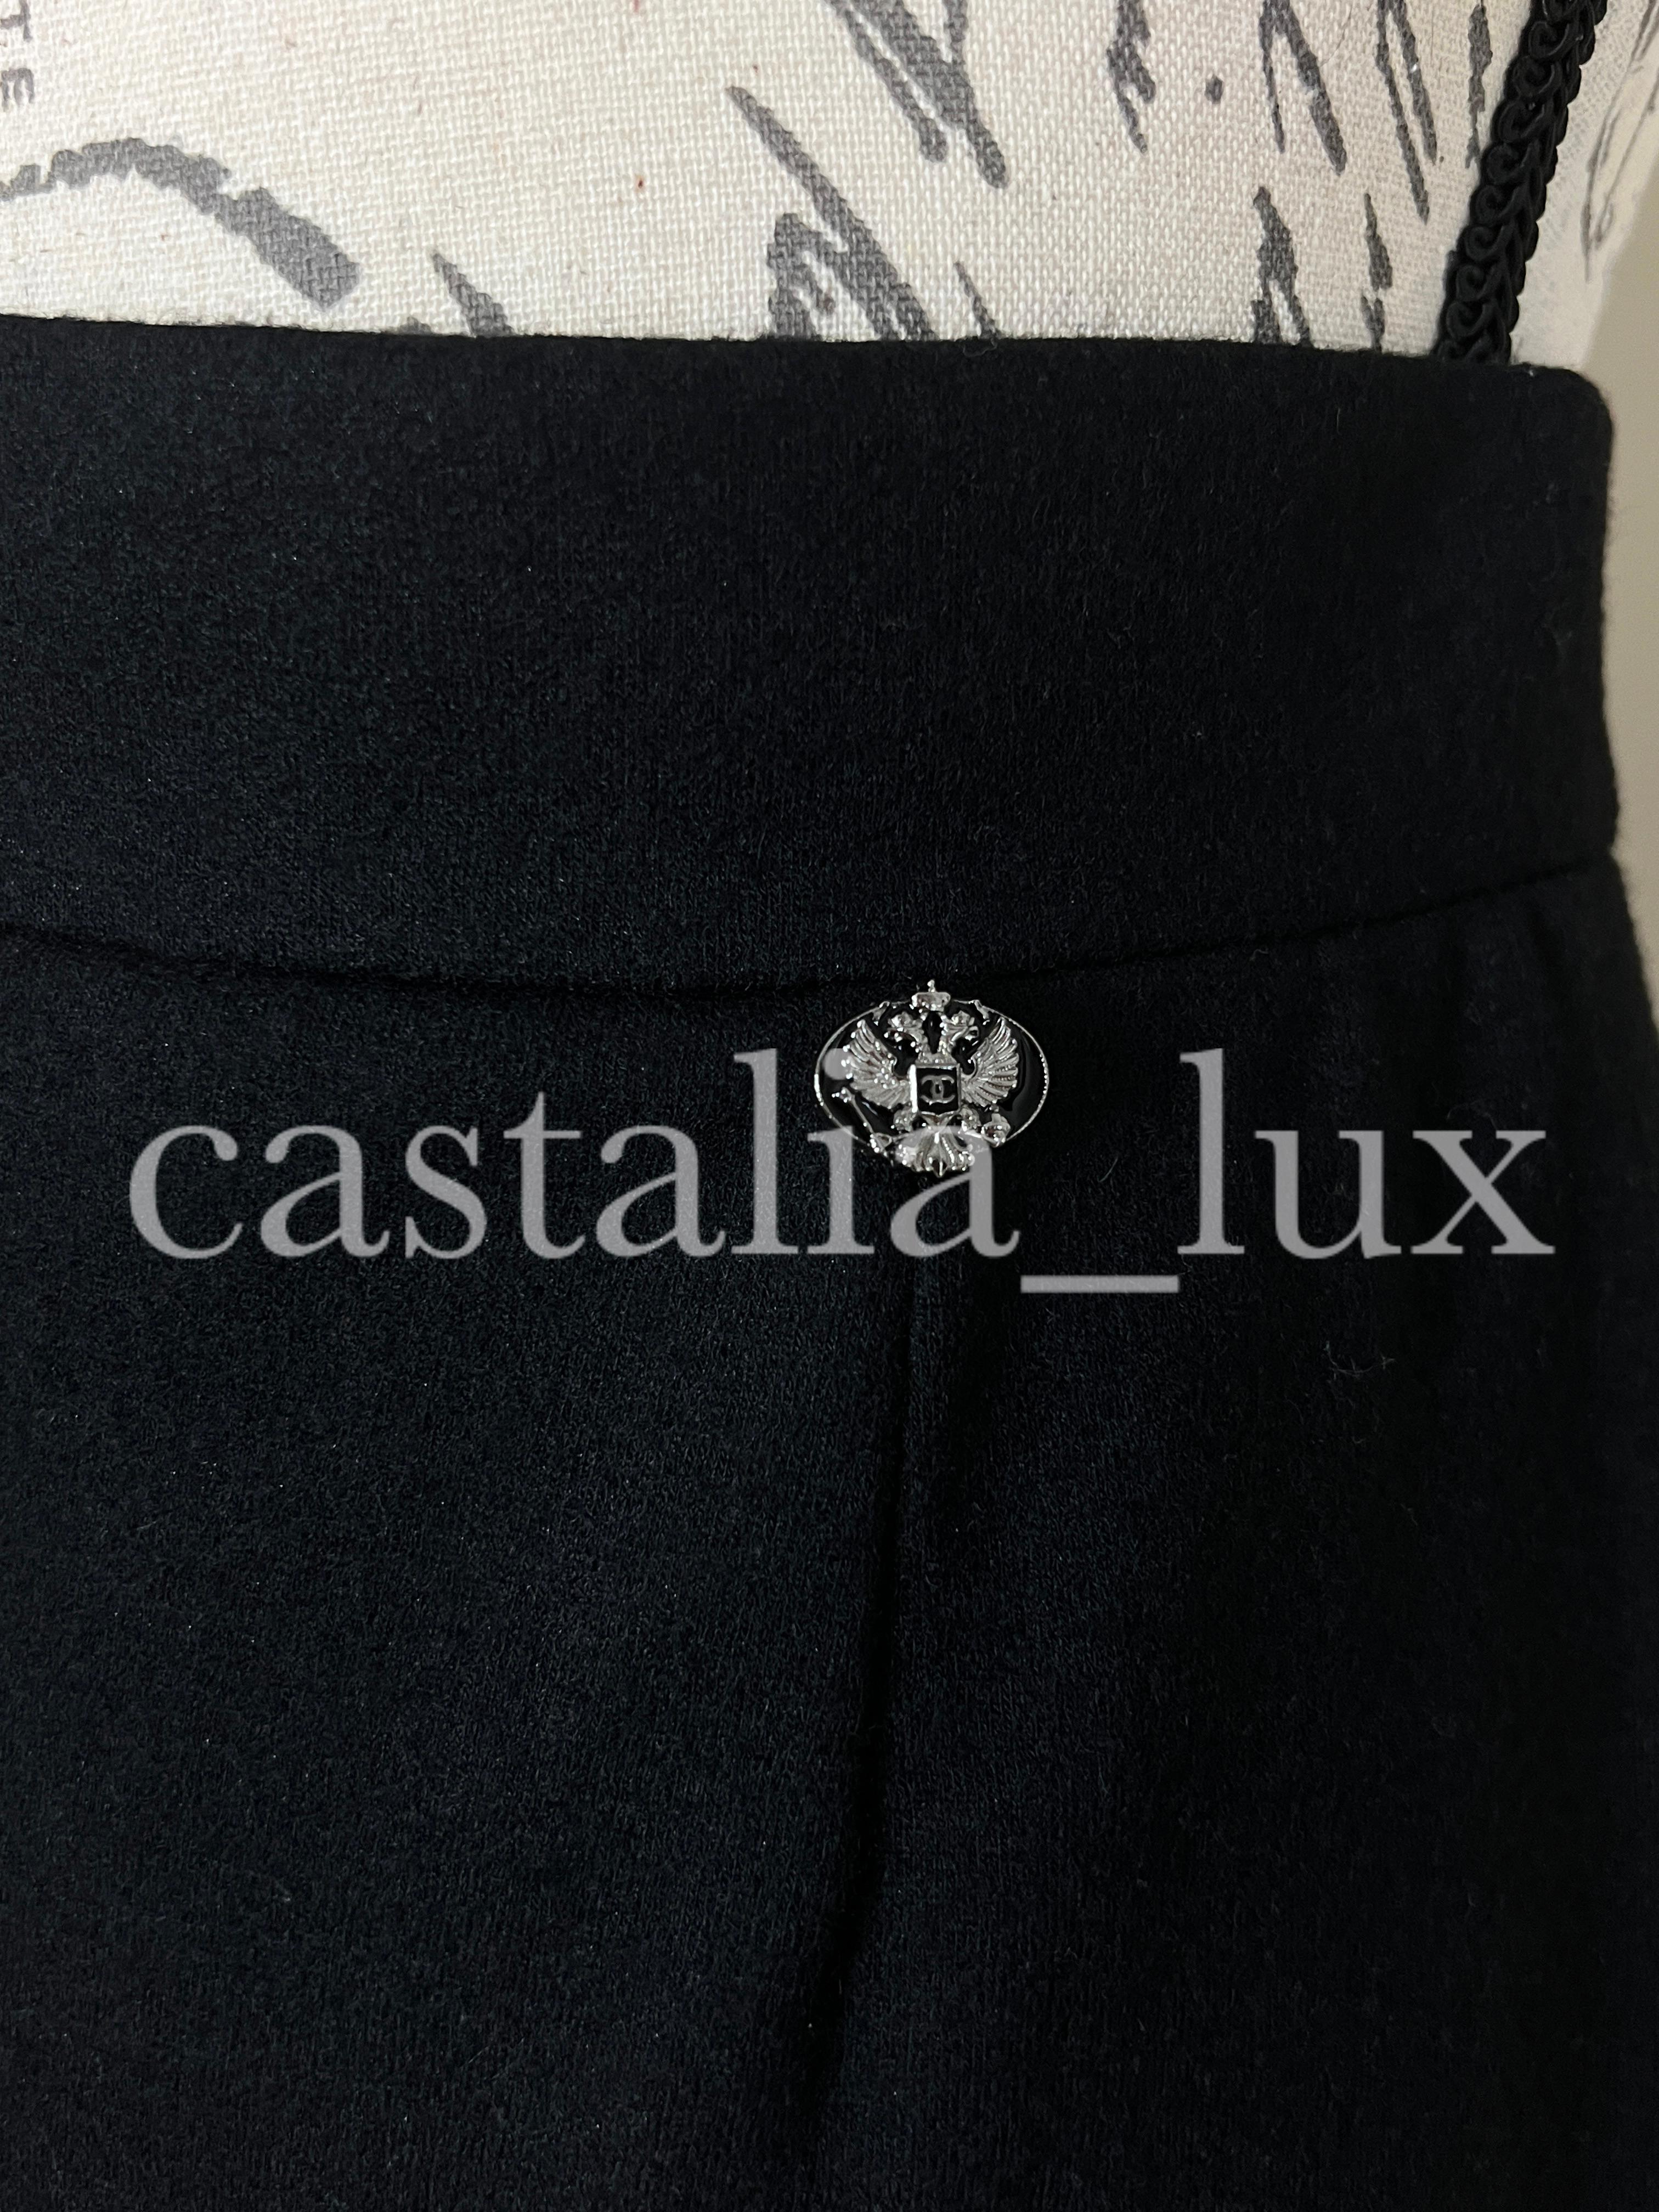 Chanel New CC Eagle Charm Black Pencil Skirt In New Condition For Sale In Dubai, AE